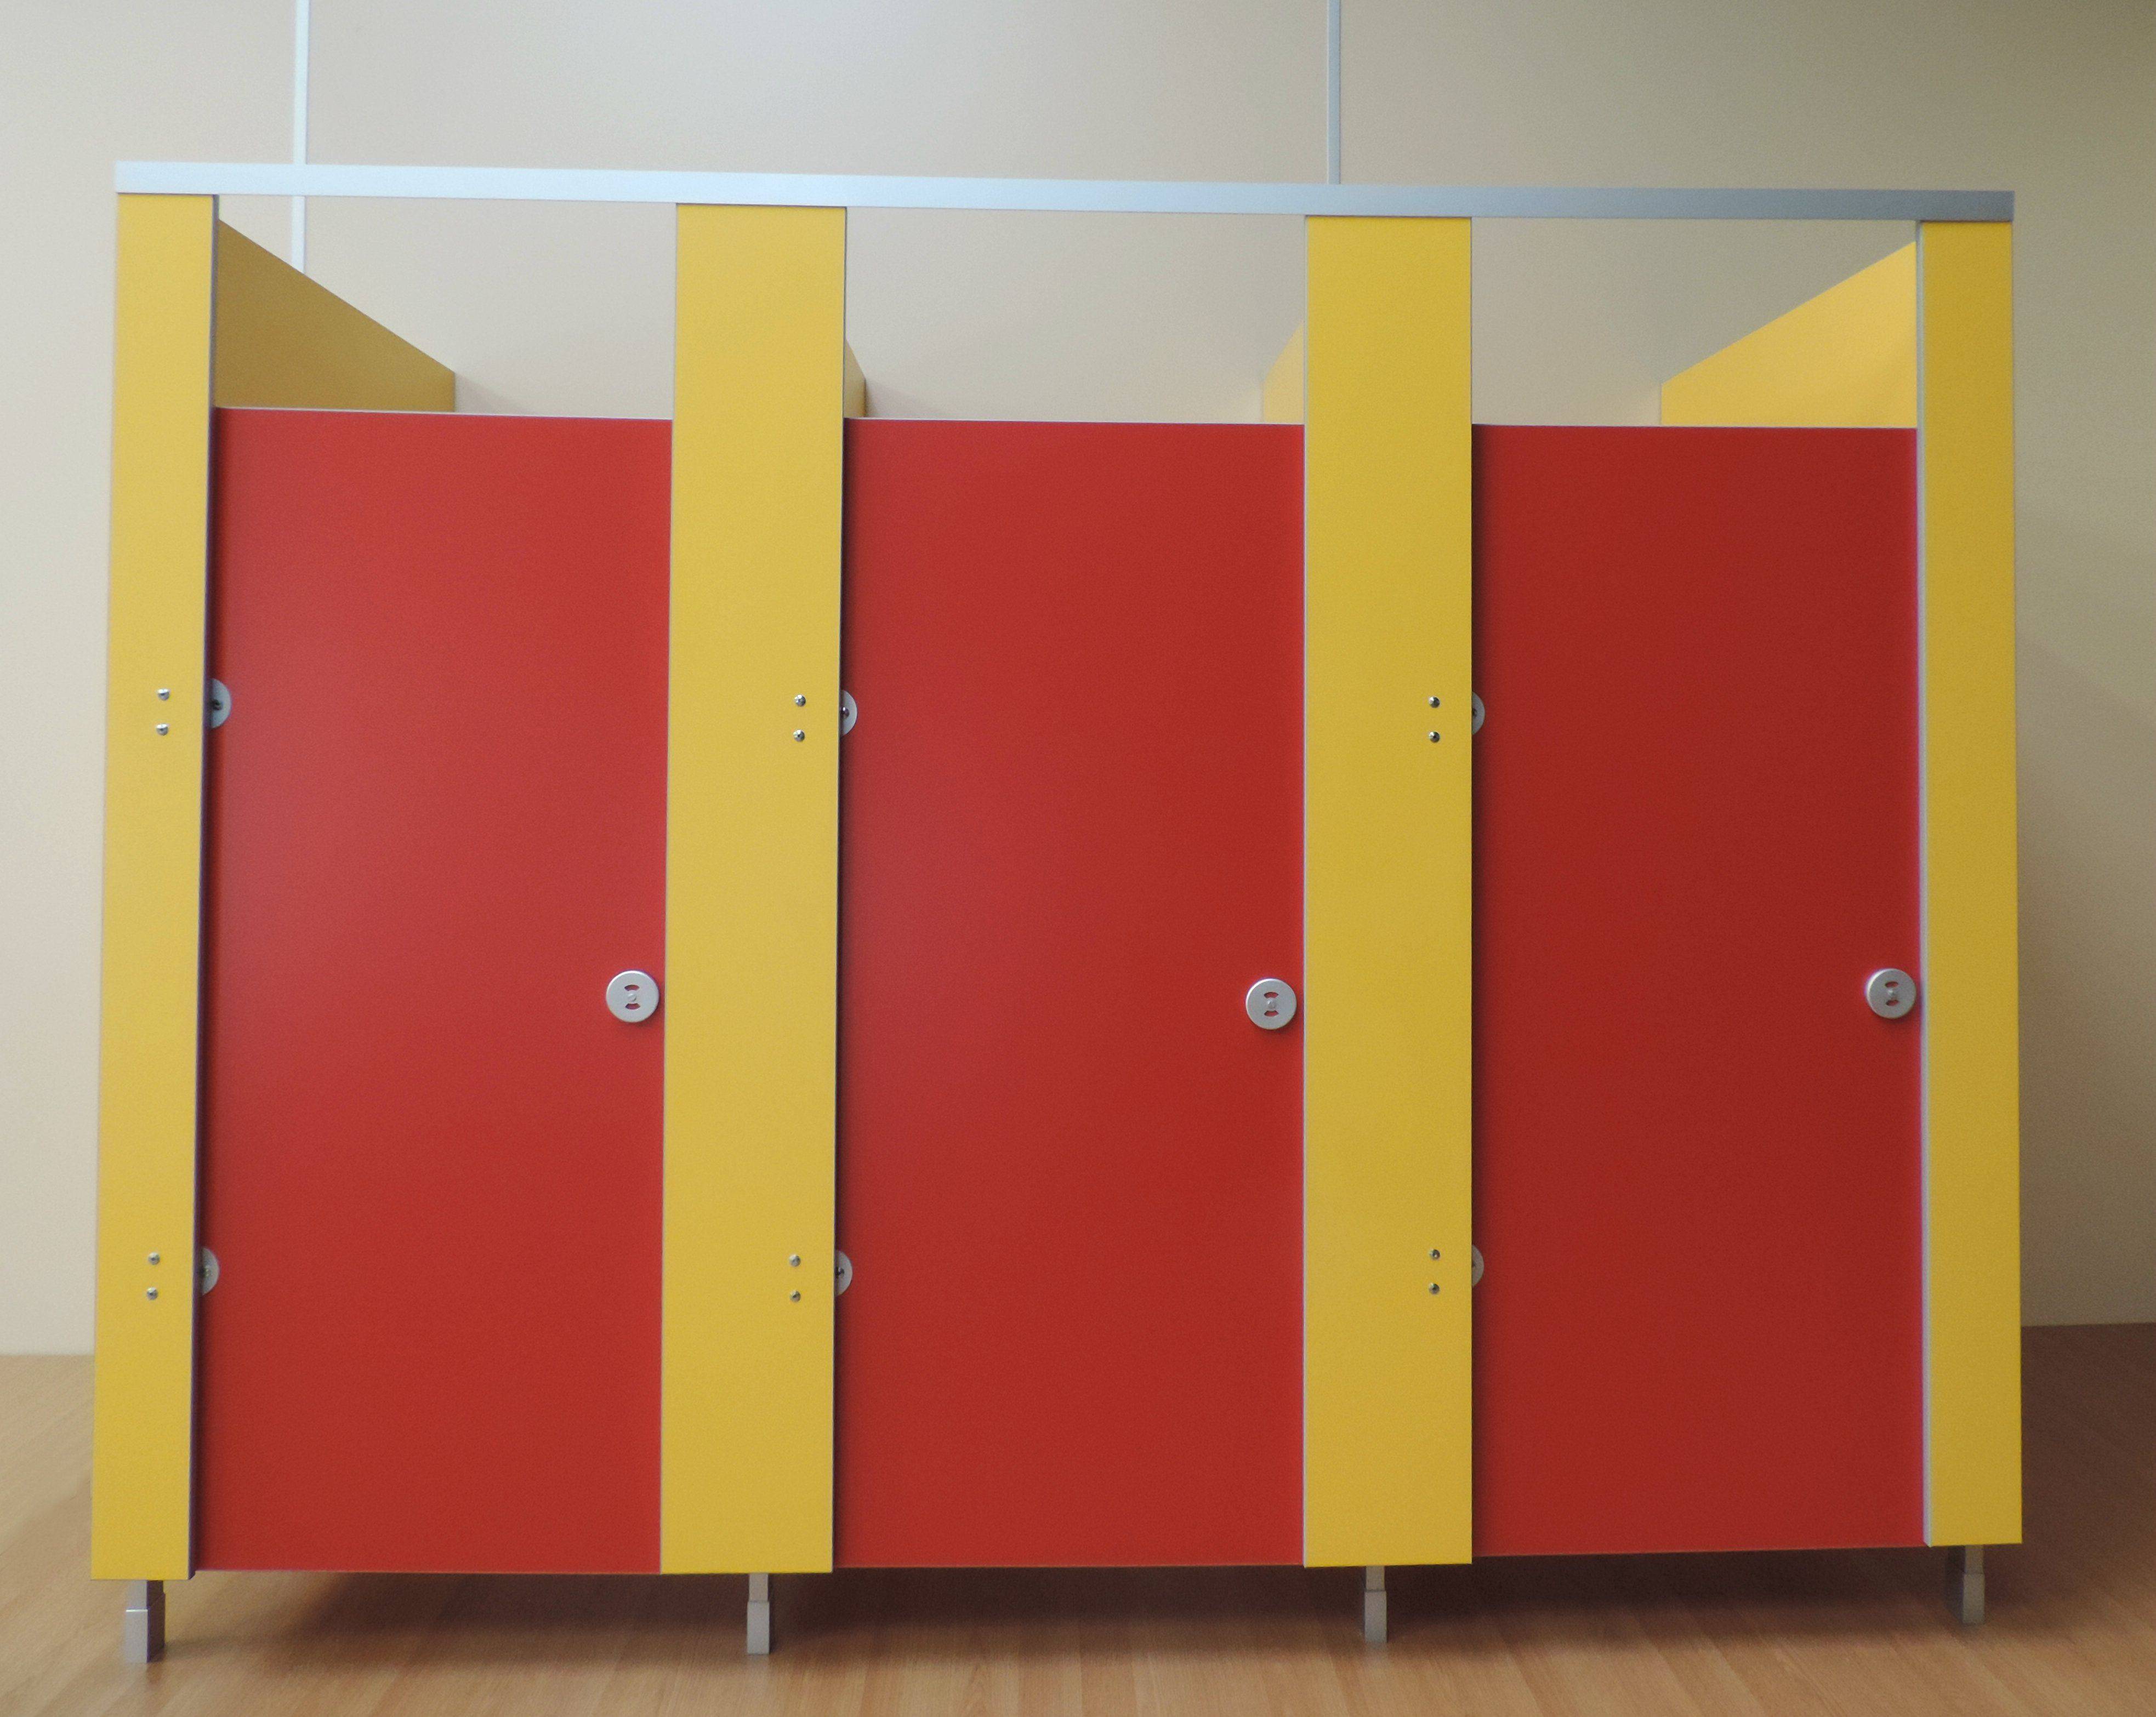 Suppliers Of Full Size Childrens Toilet Cubicles UK